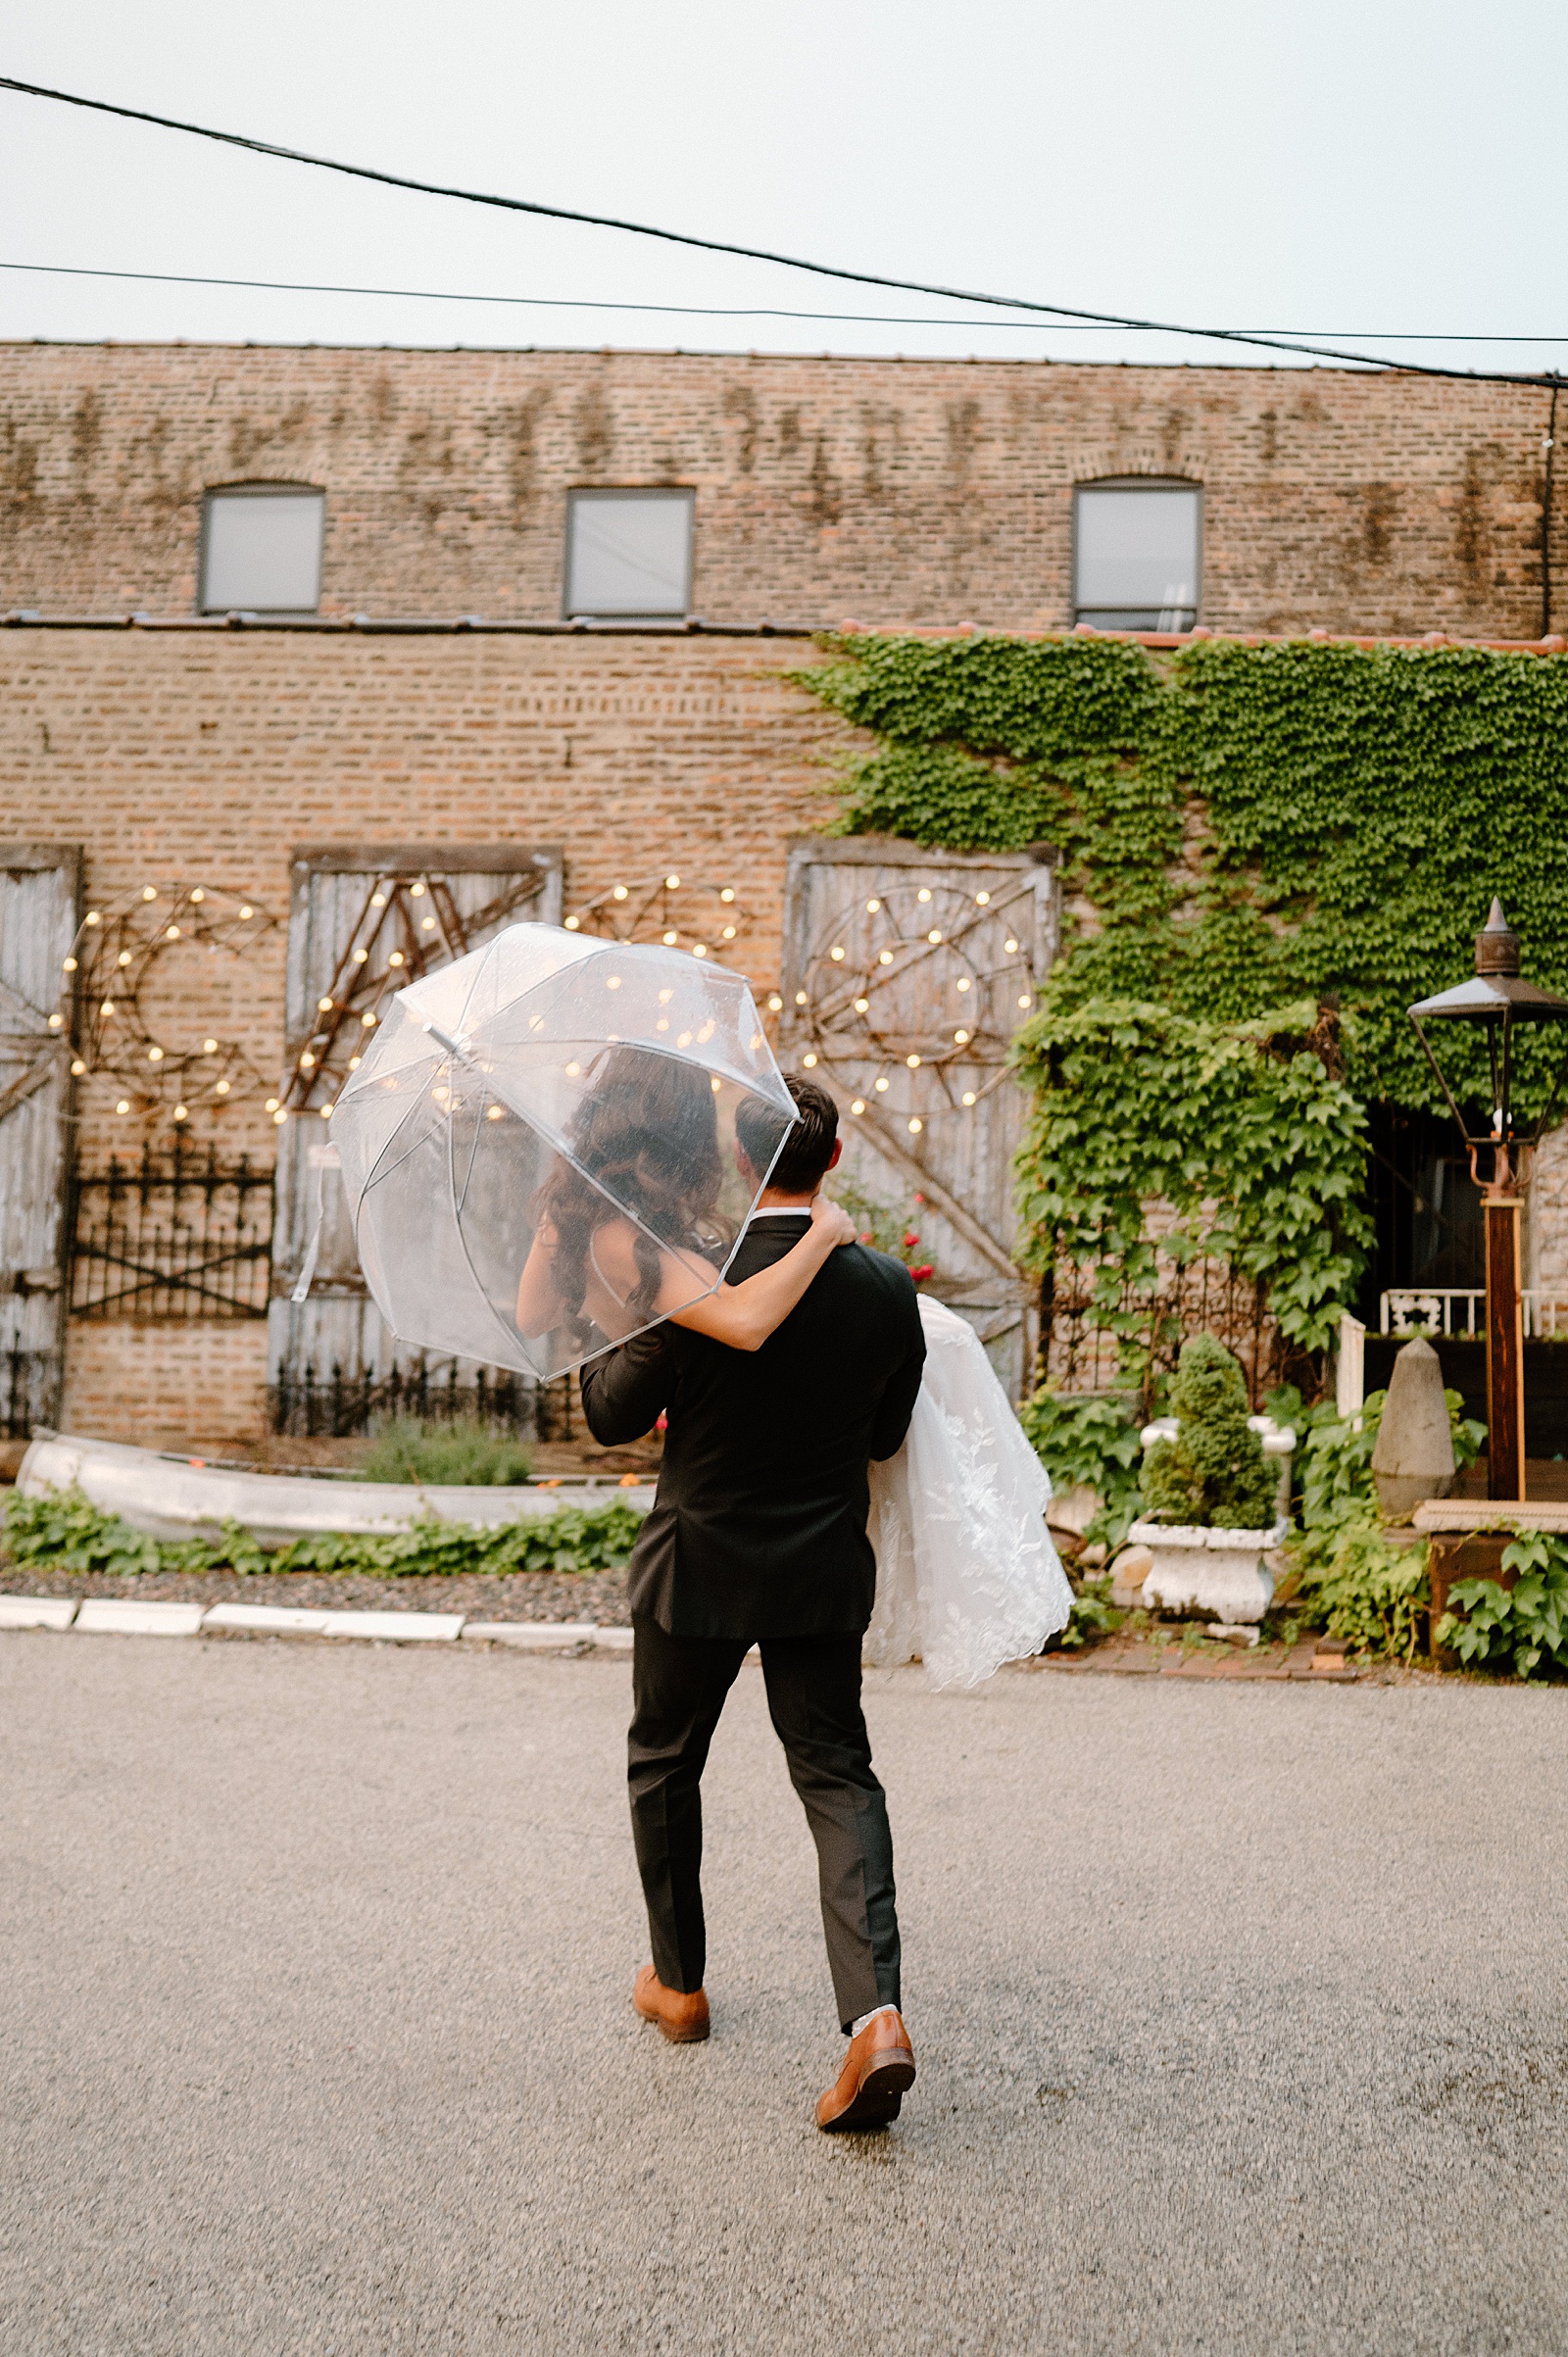 Groom carrying bride with clear umbrella in a courtyard for their rainy wedding day 